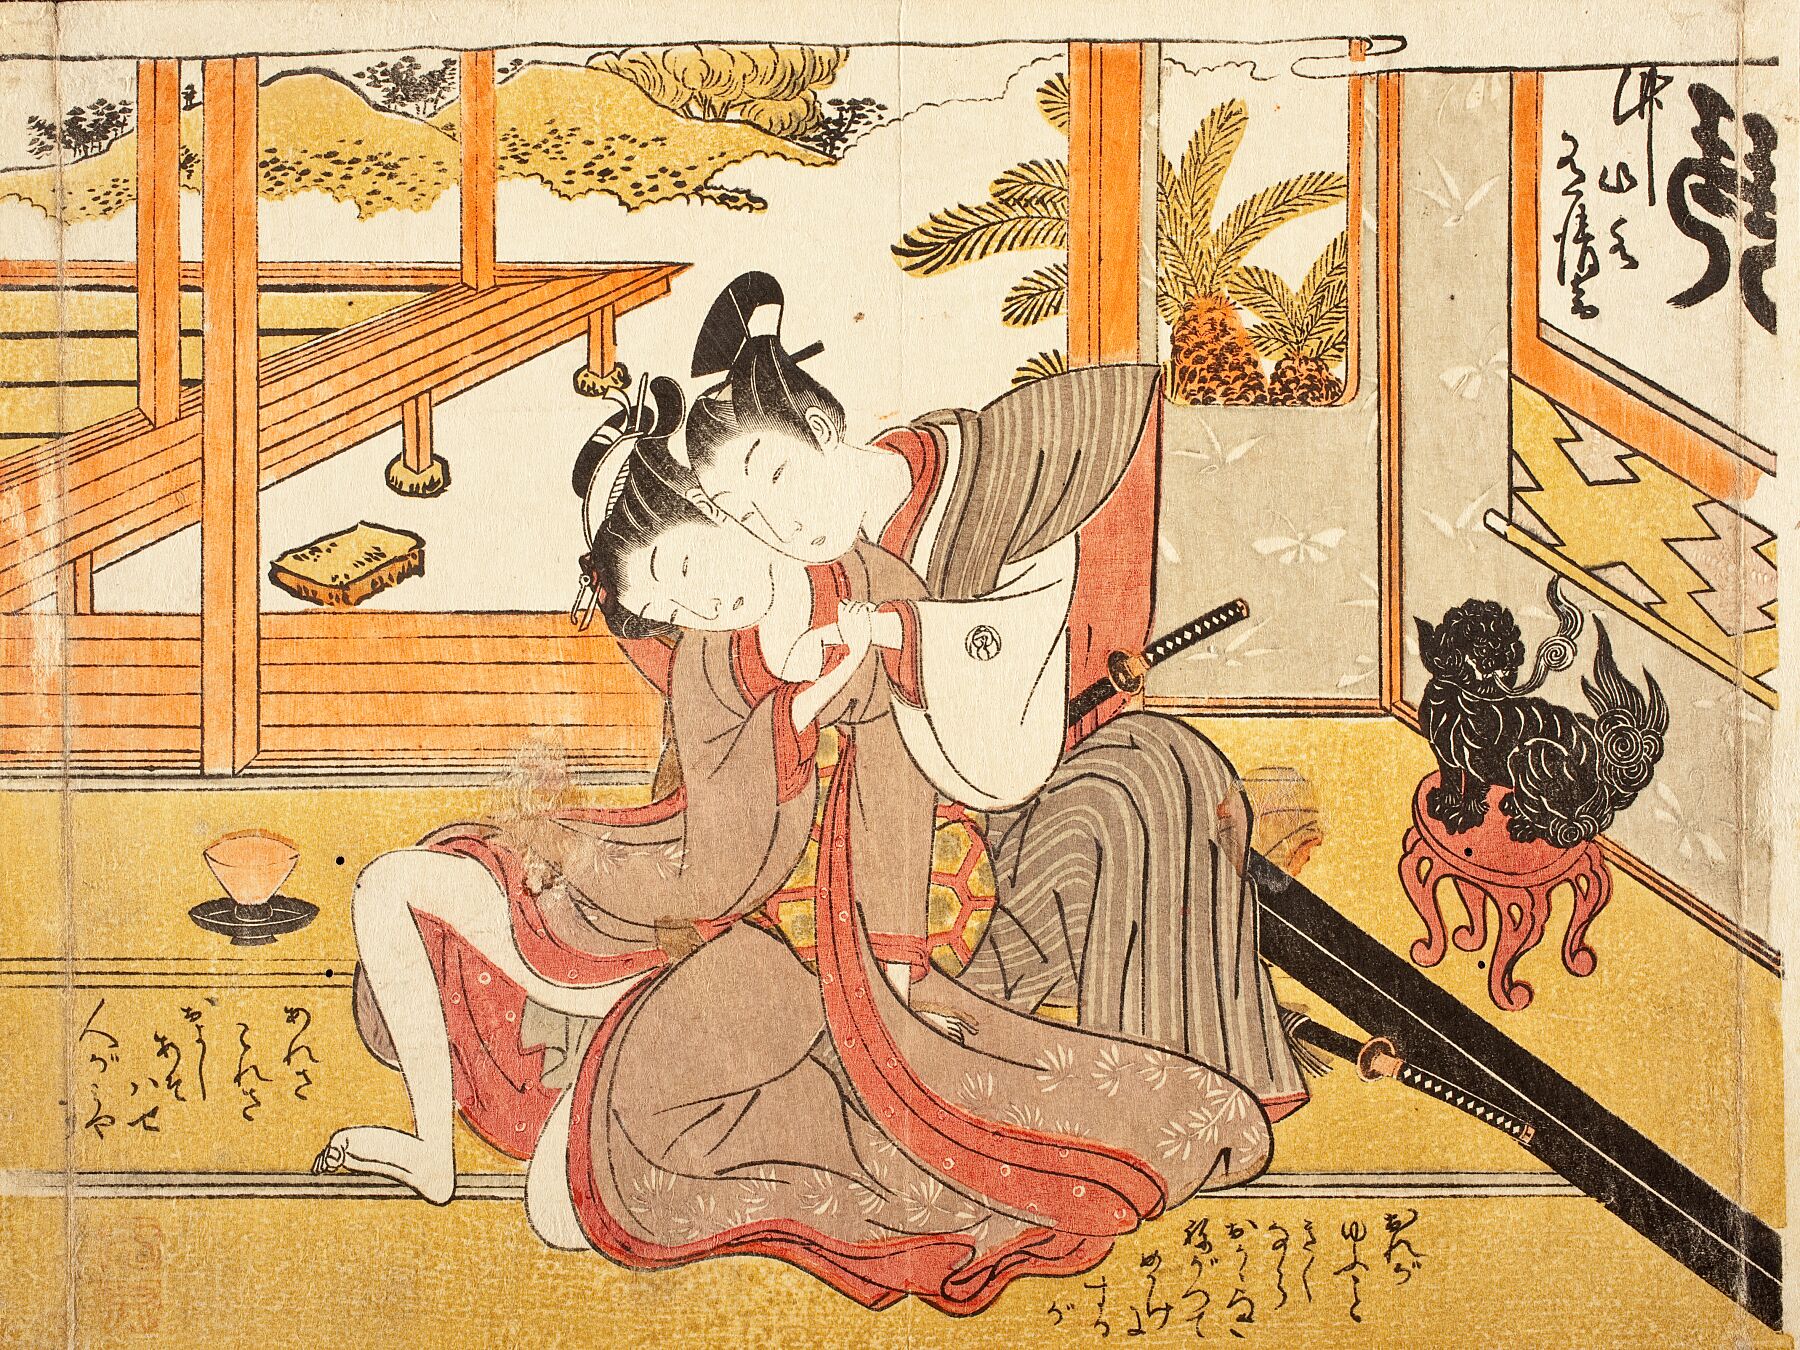 Untitled Picture from an Erotic Album by Isoda Koryūsai - early 1770s